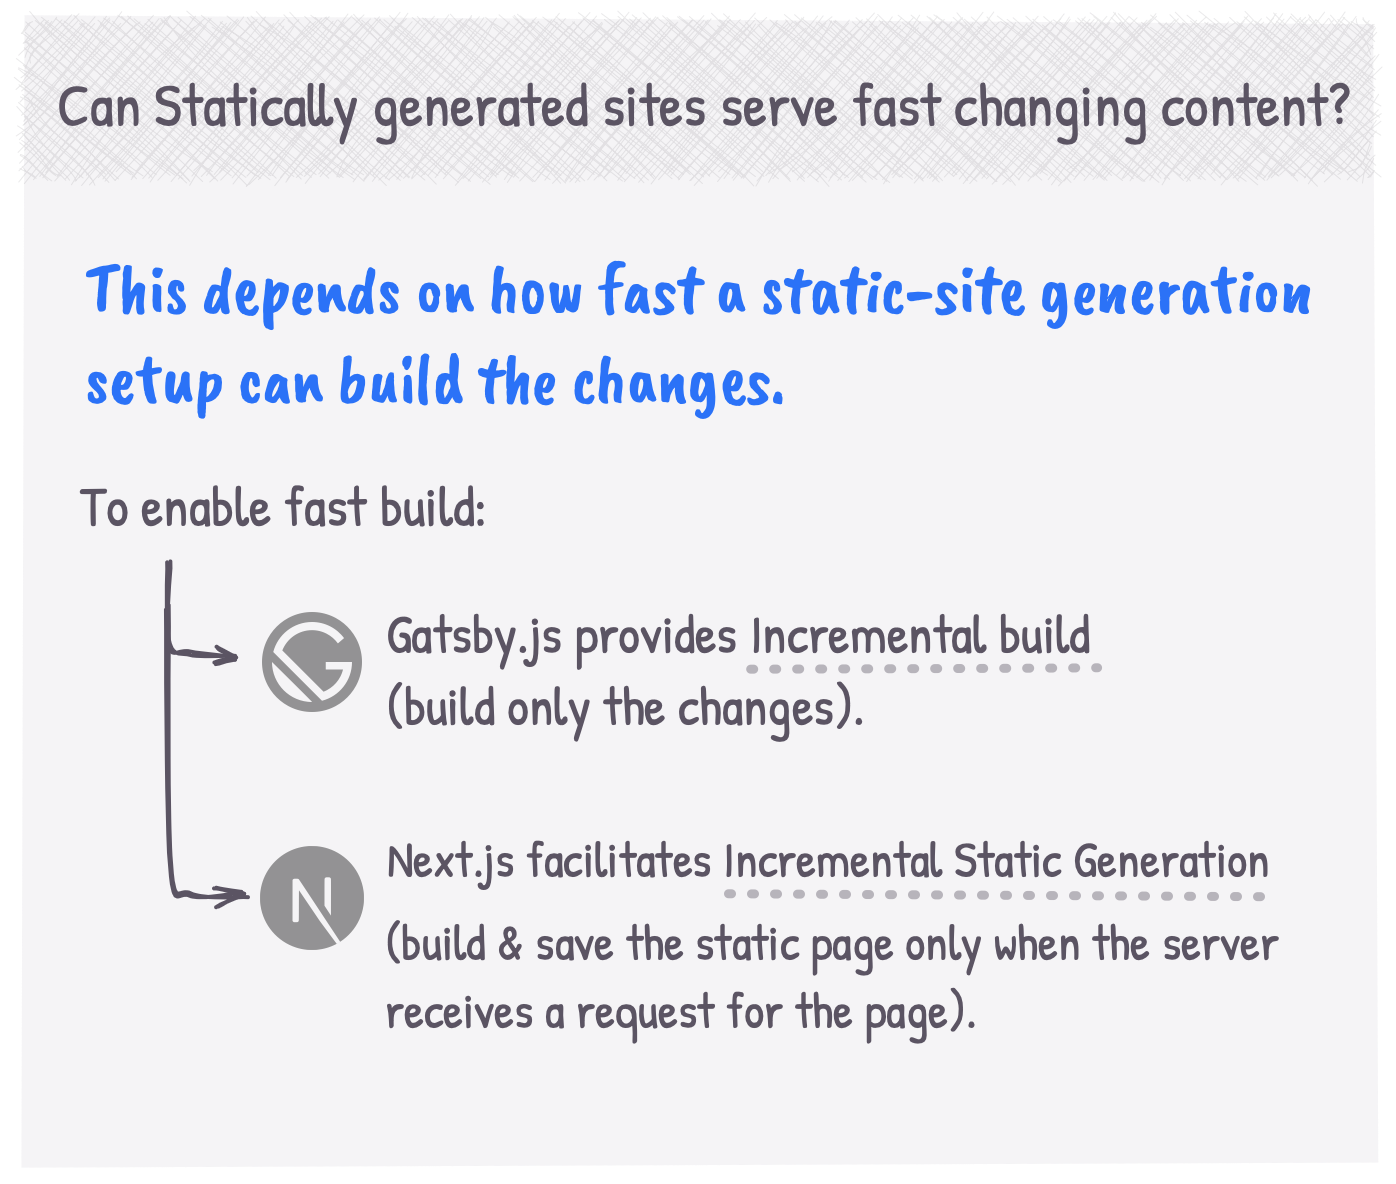 Can statically generated sites serve fast changing content?